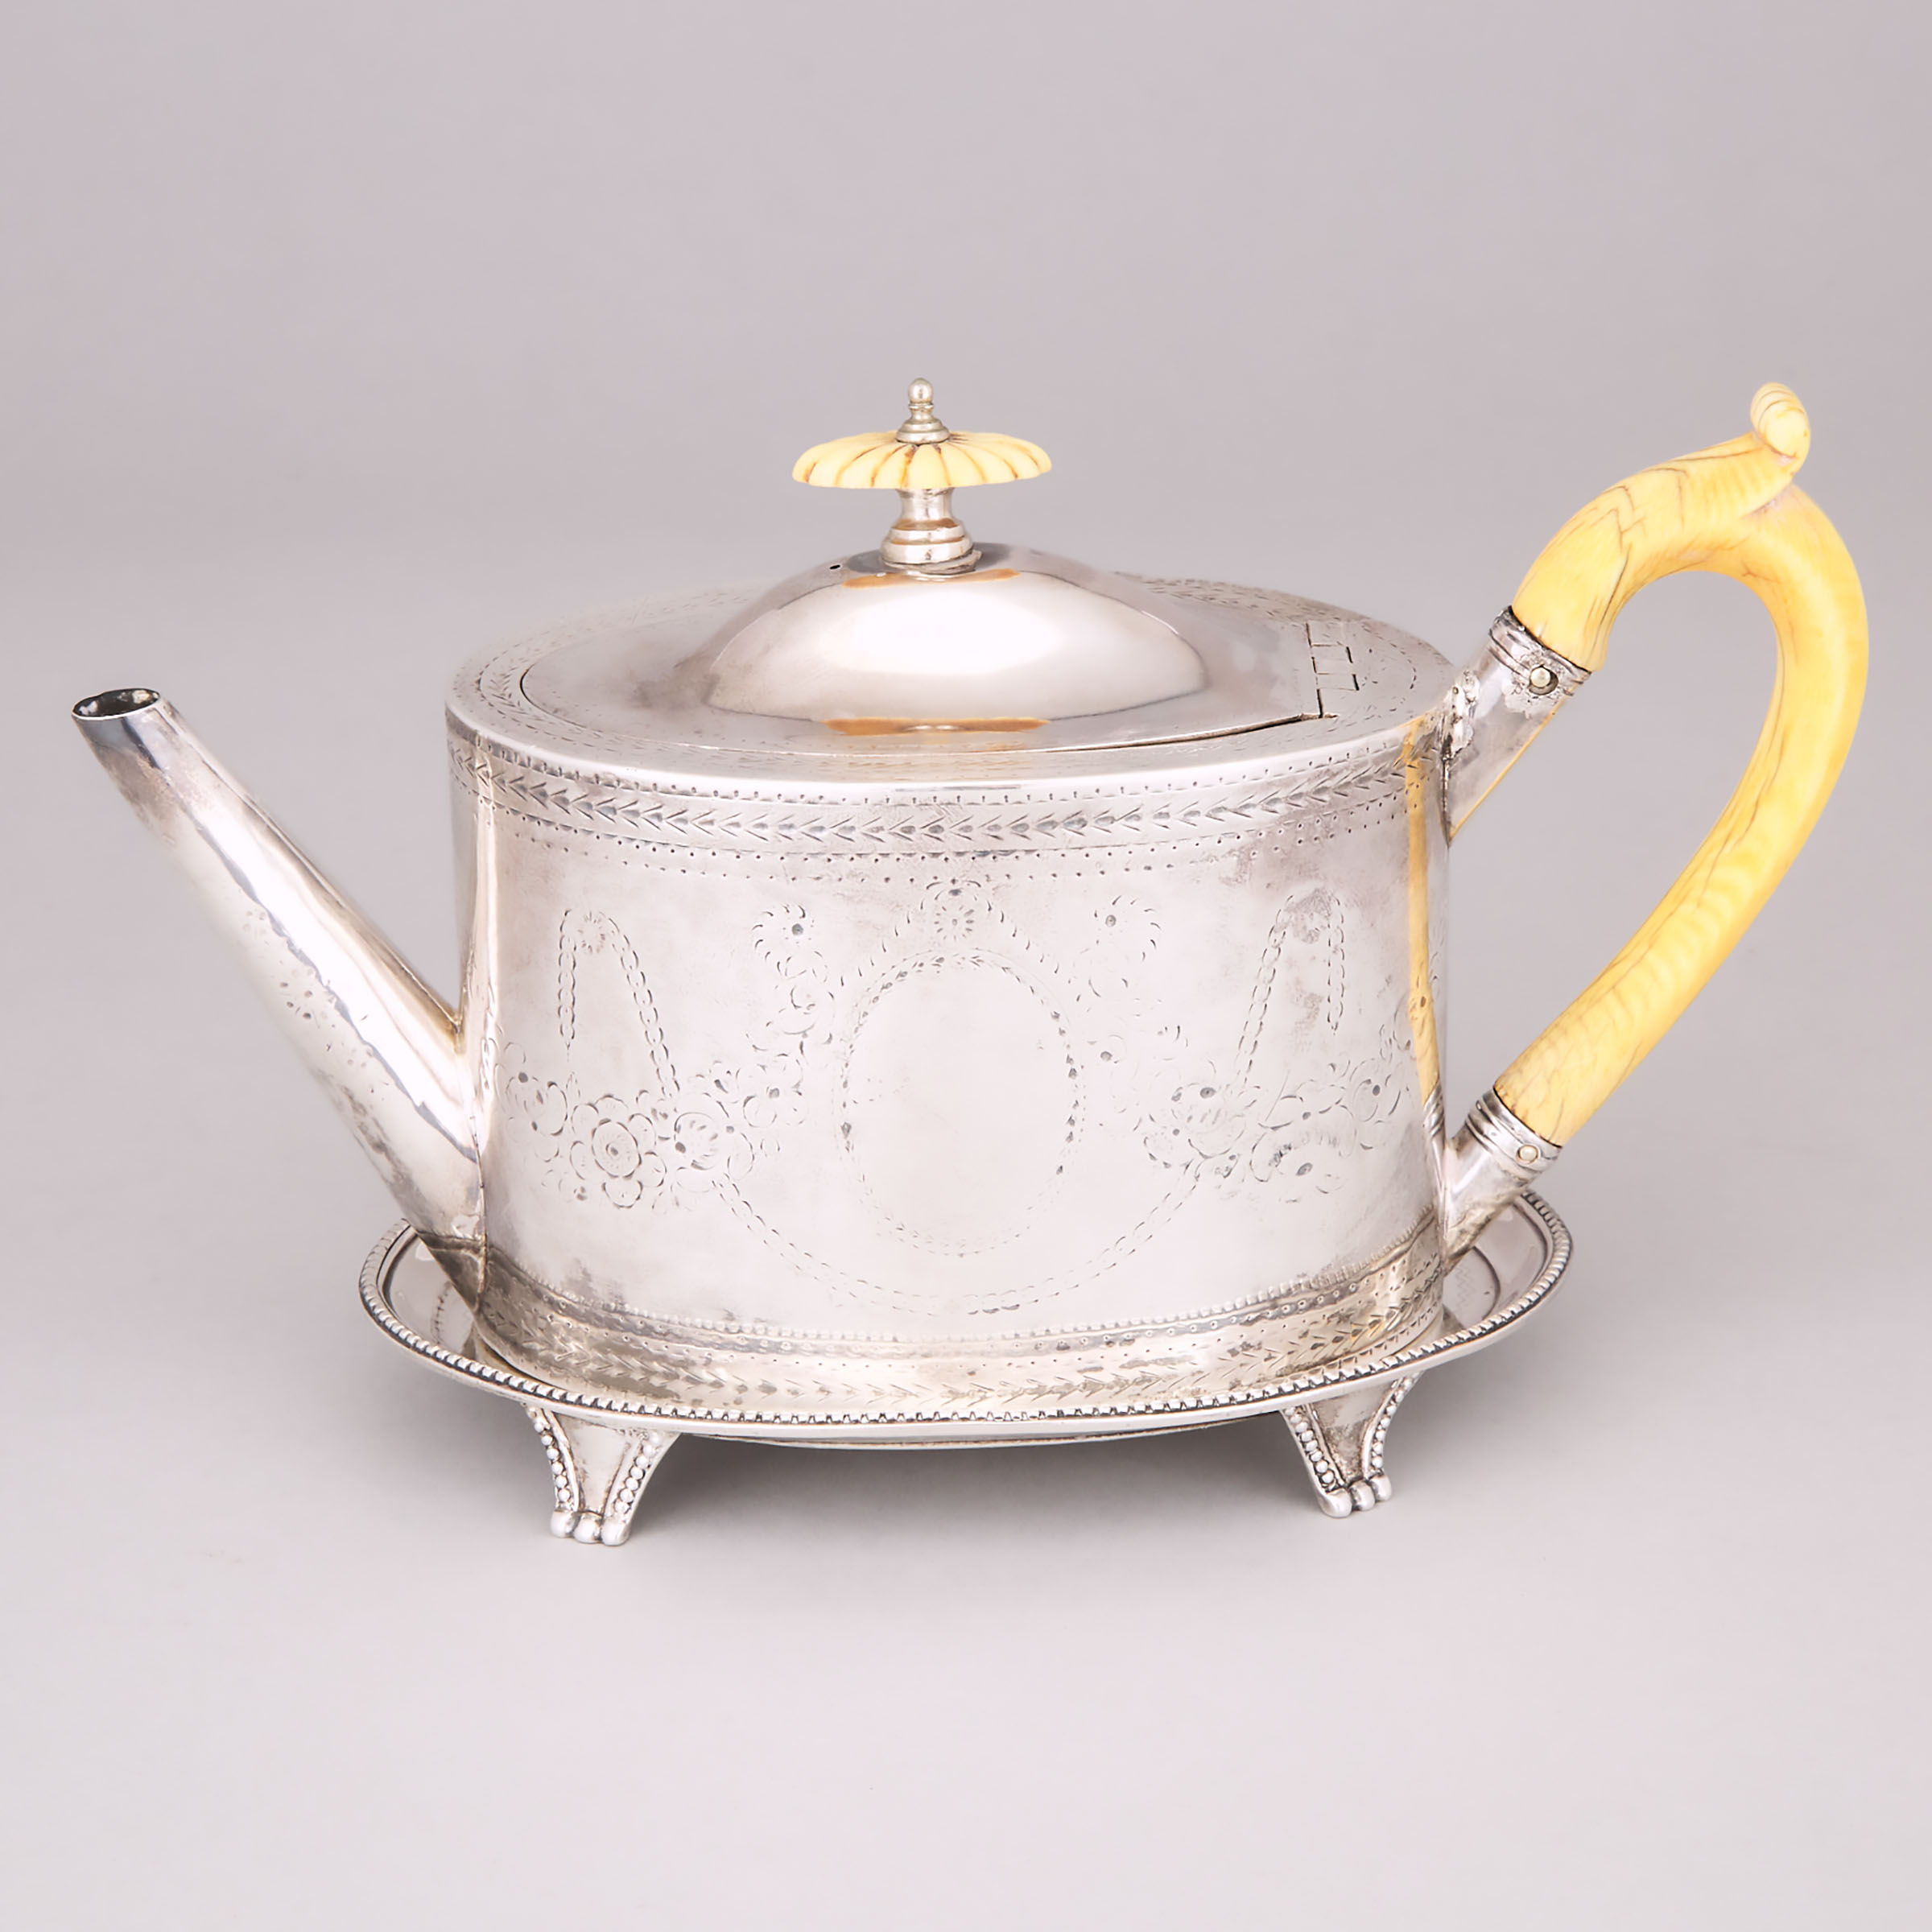 George III Silver Teapot and a Stand, Benjamin Montigue and James Young, London, 1783 and 1784